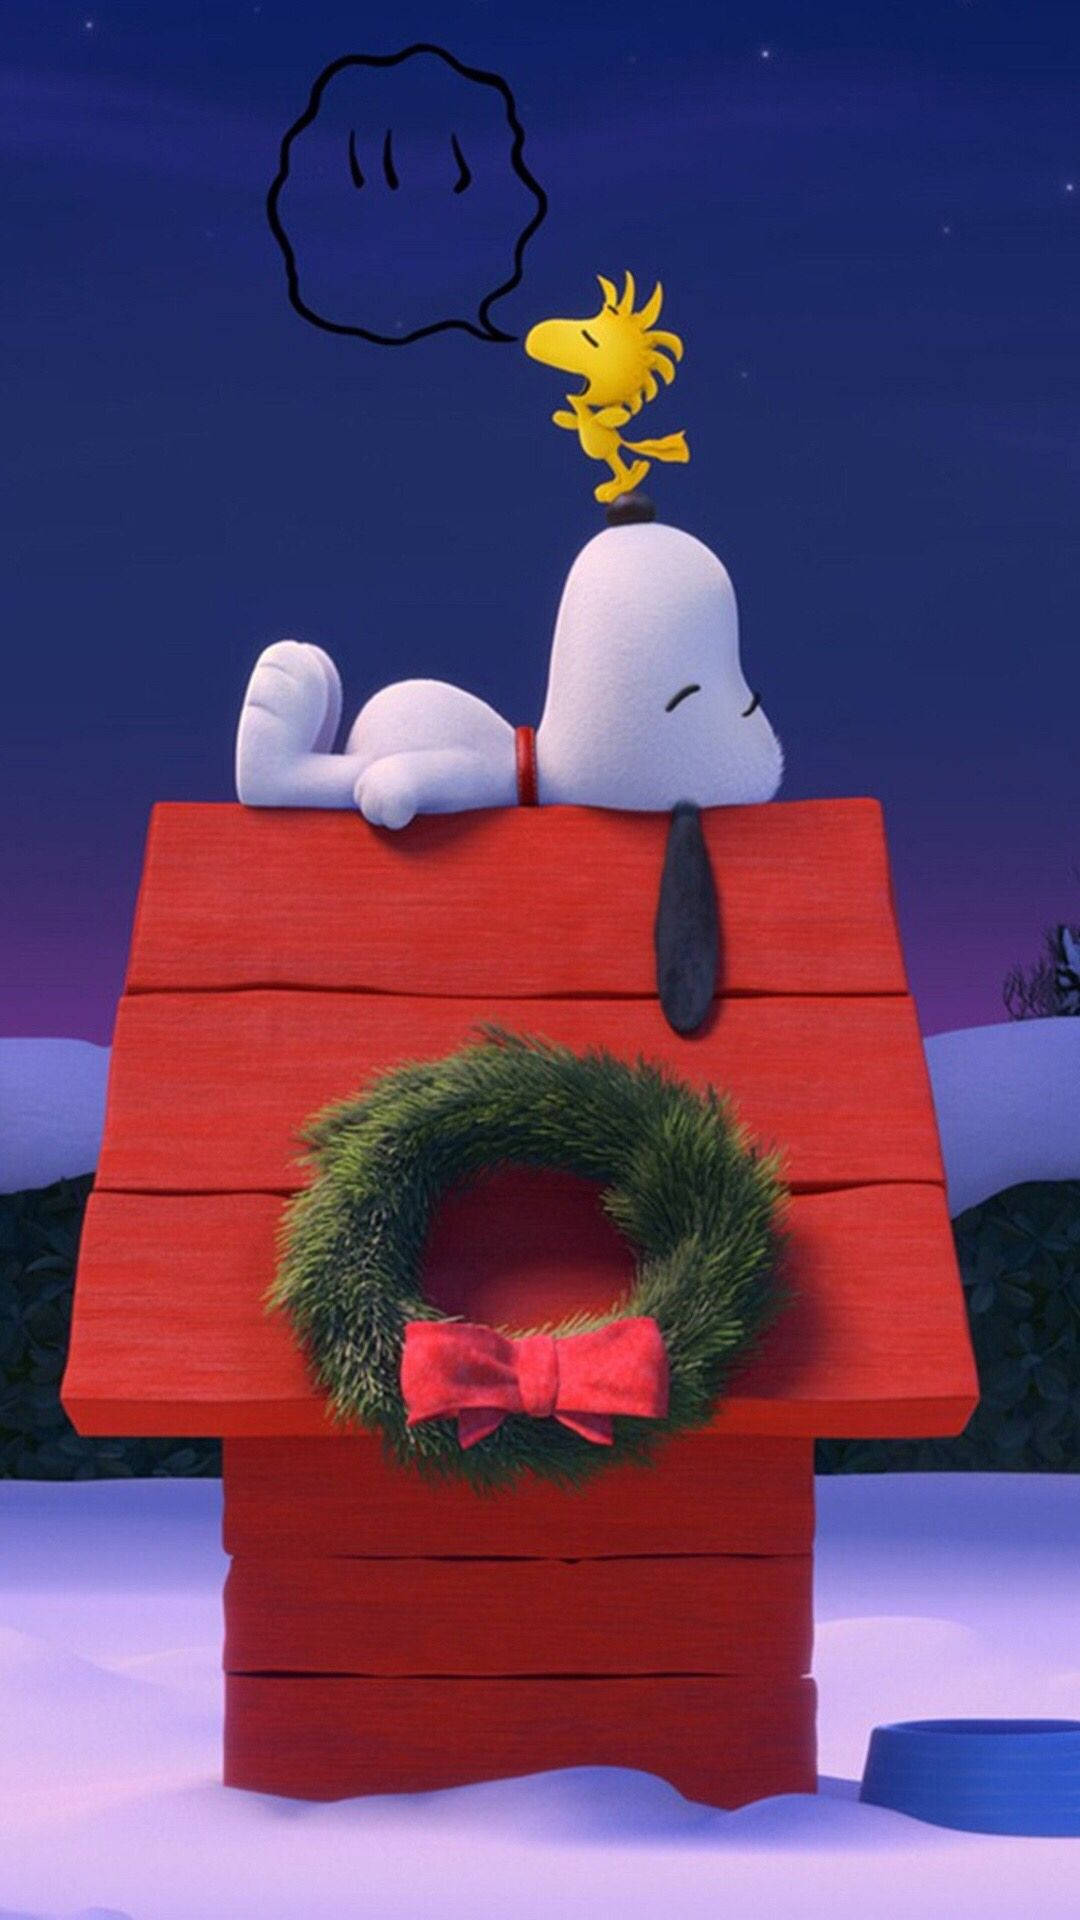 1080X1920 Snoopy Wallpaper and Background